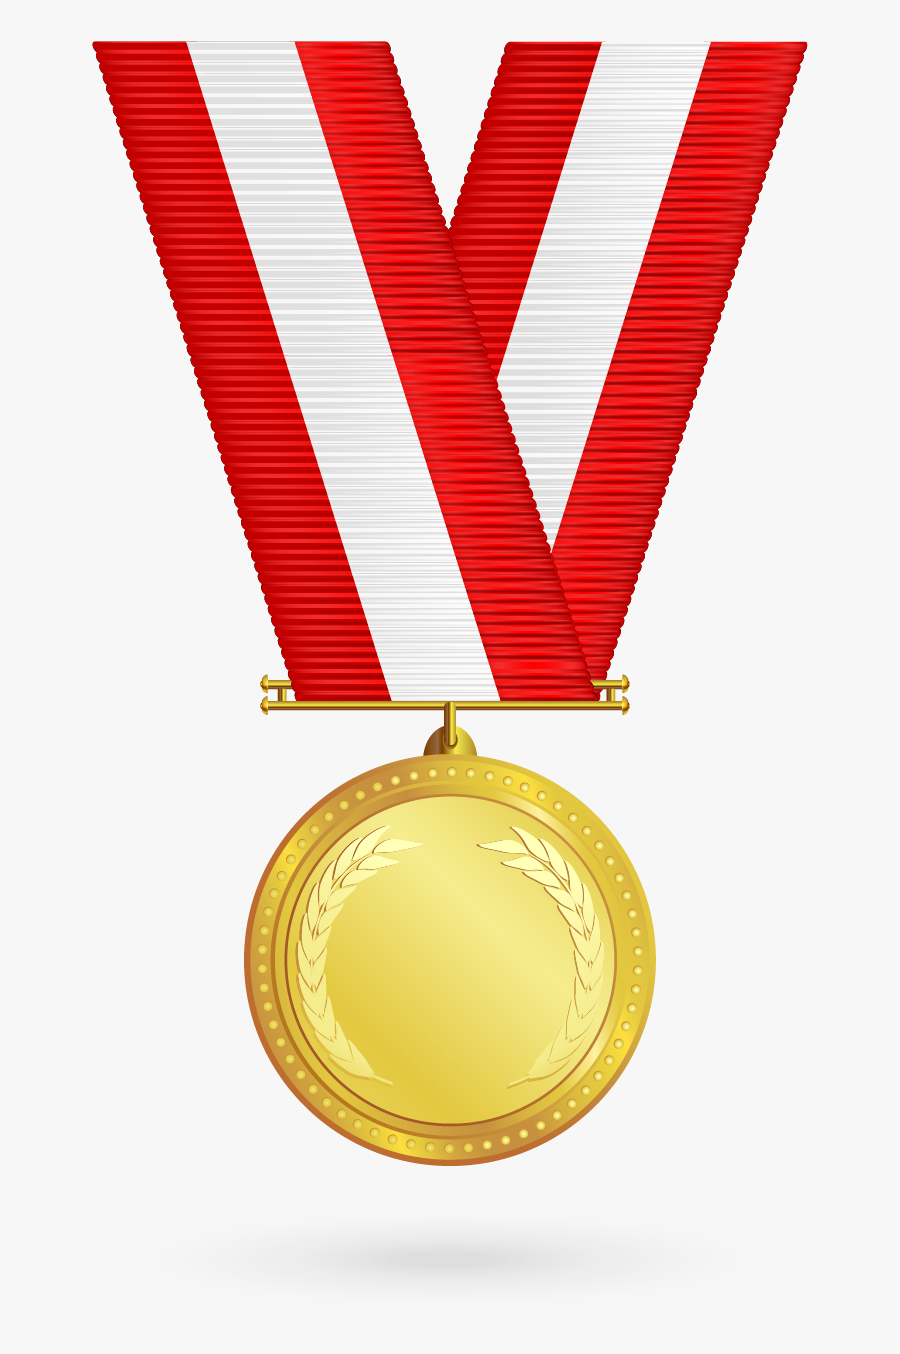 Gold Medal Free Png Images Clipart - Portable Network Graphics, Transparent Clipart